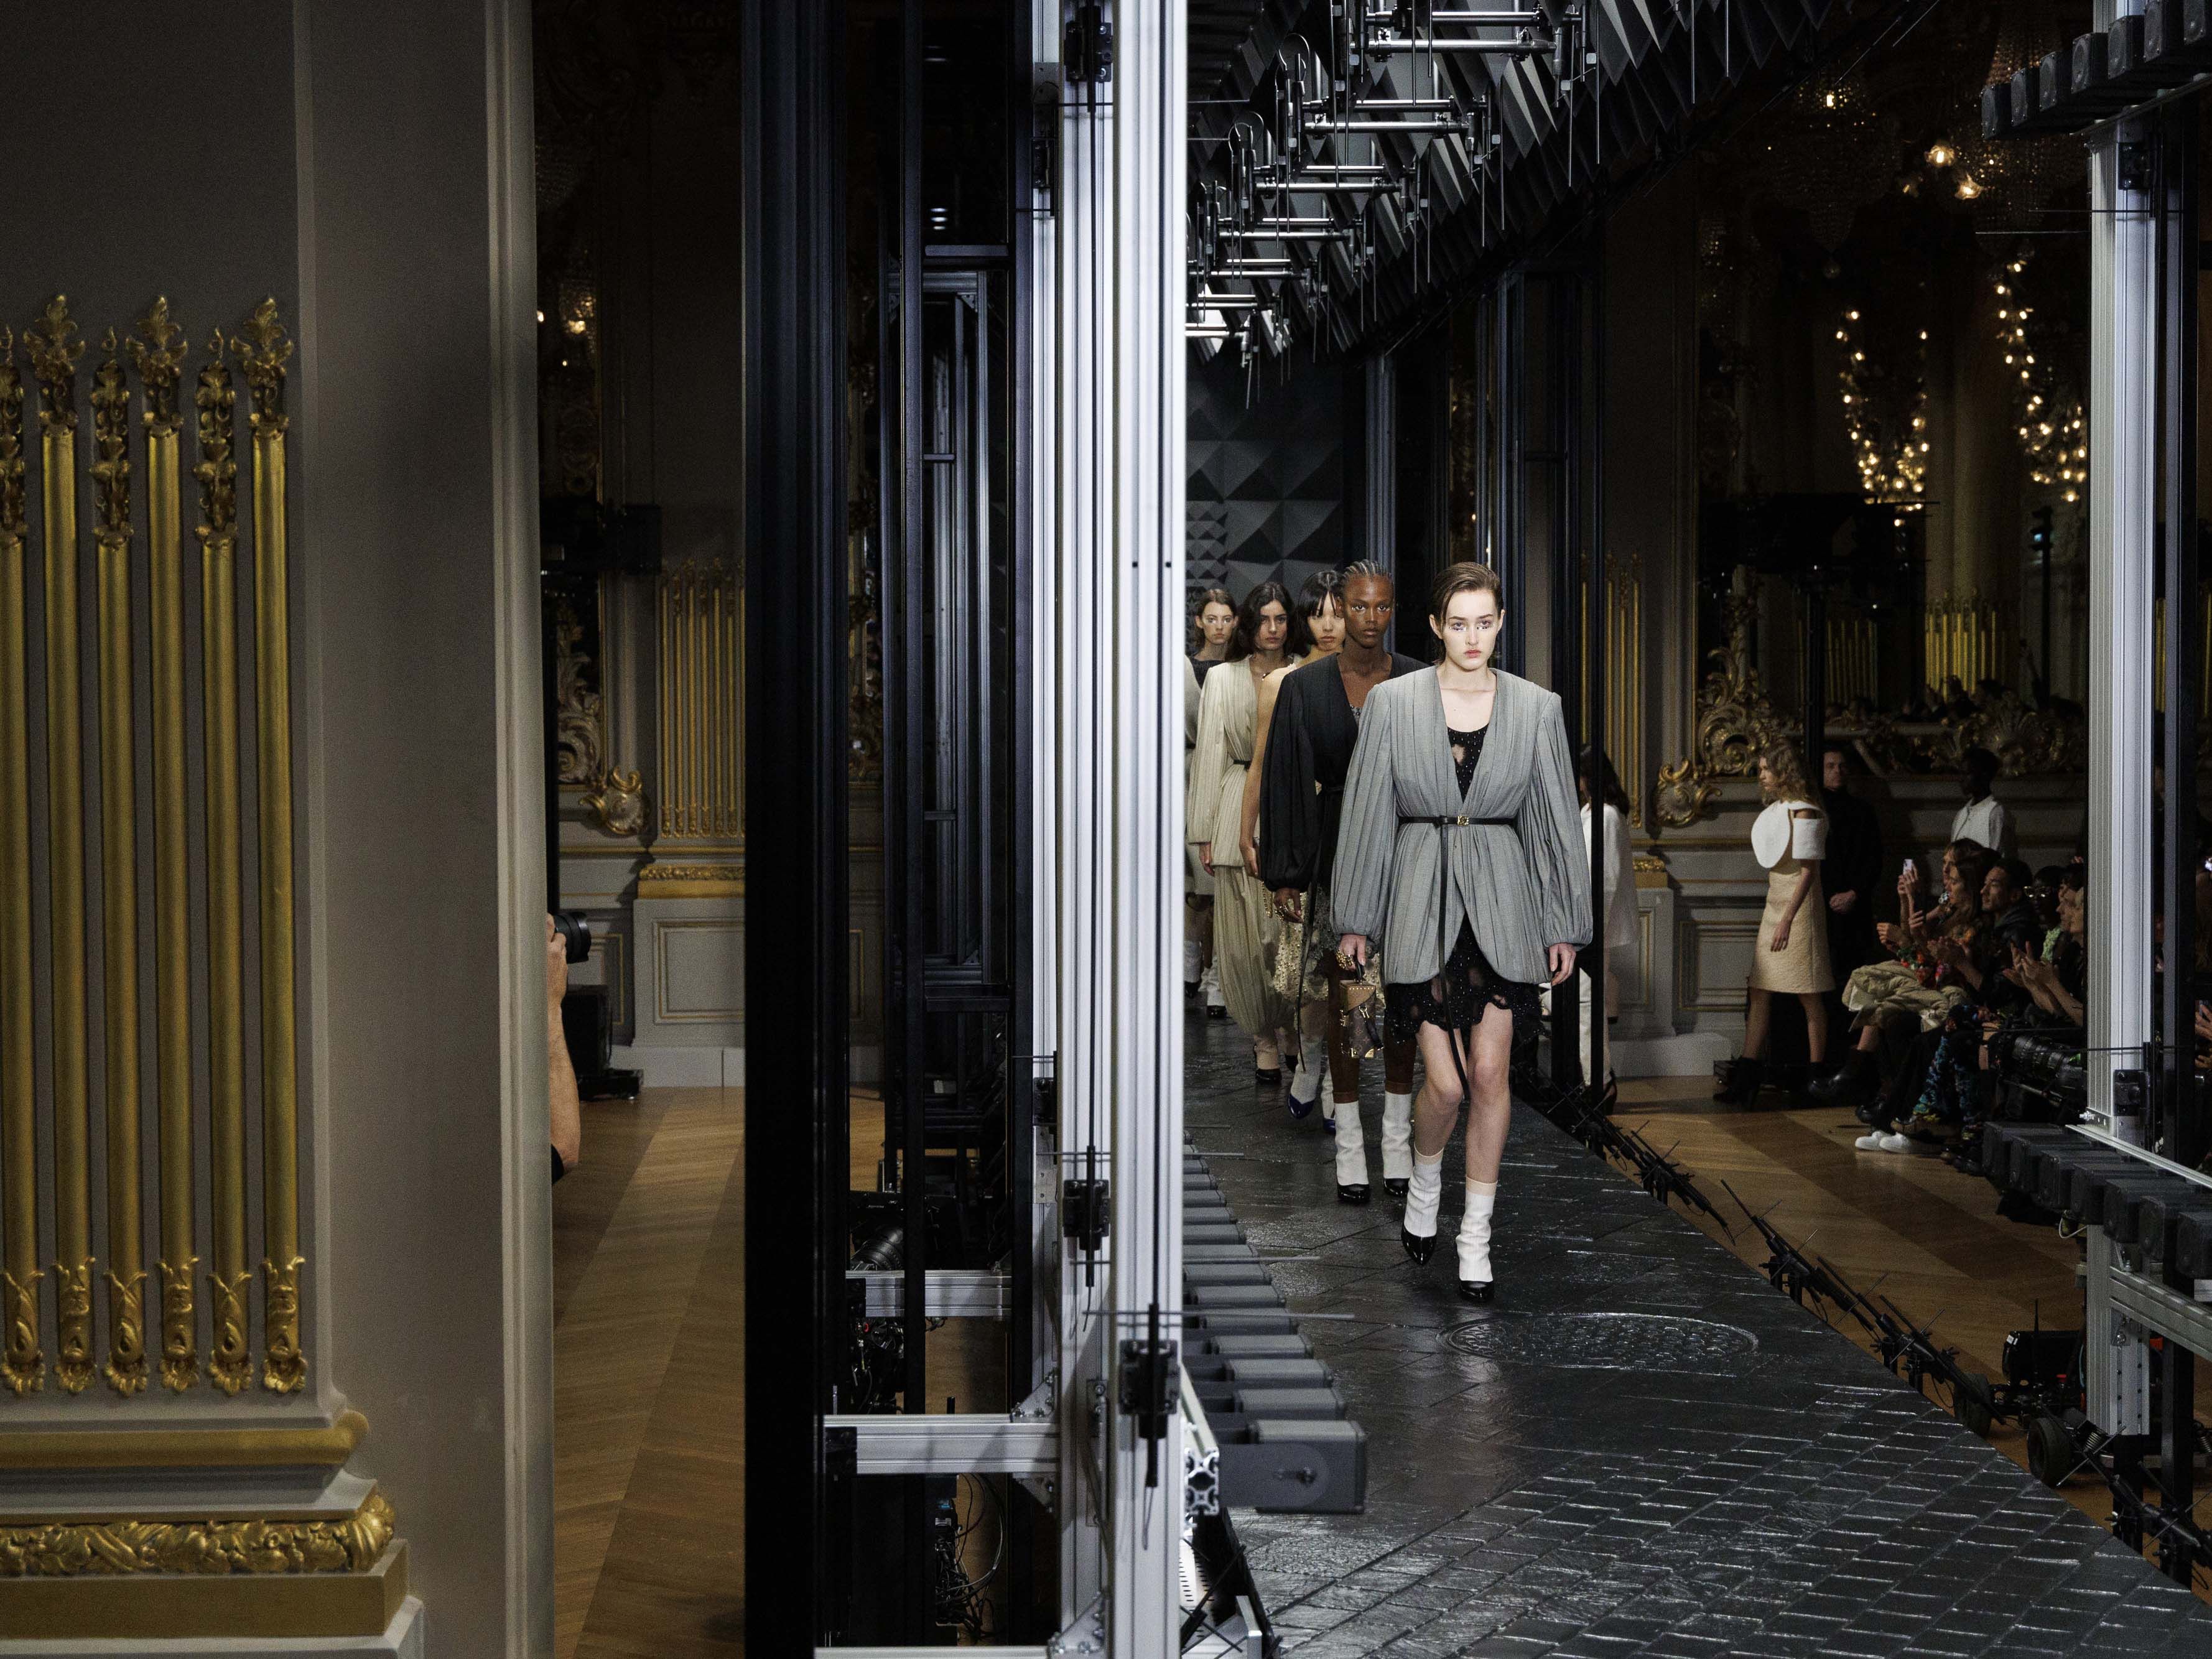 Louis Vuitton at London: the latest Nicolas Ghesquiere inspirations